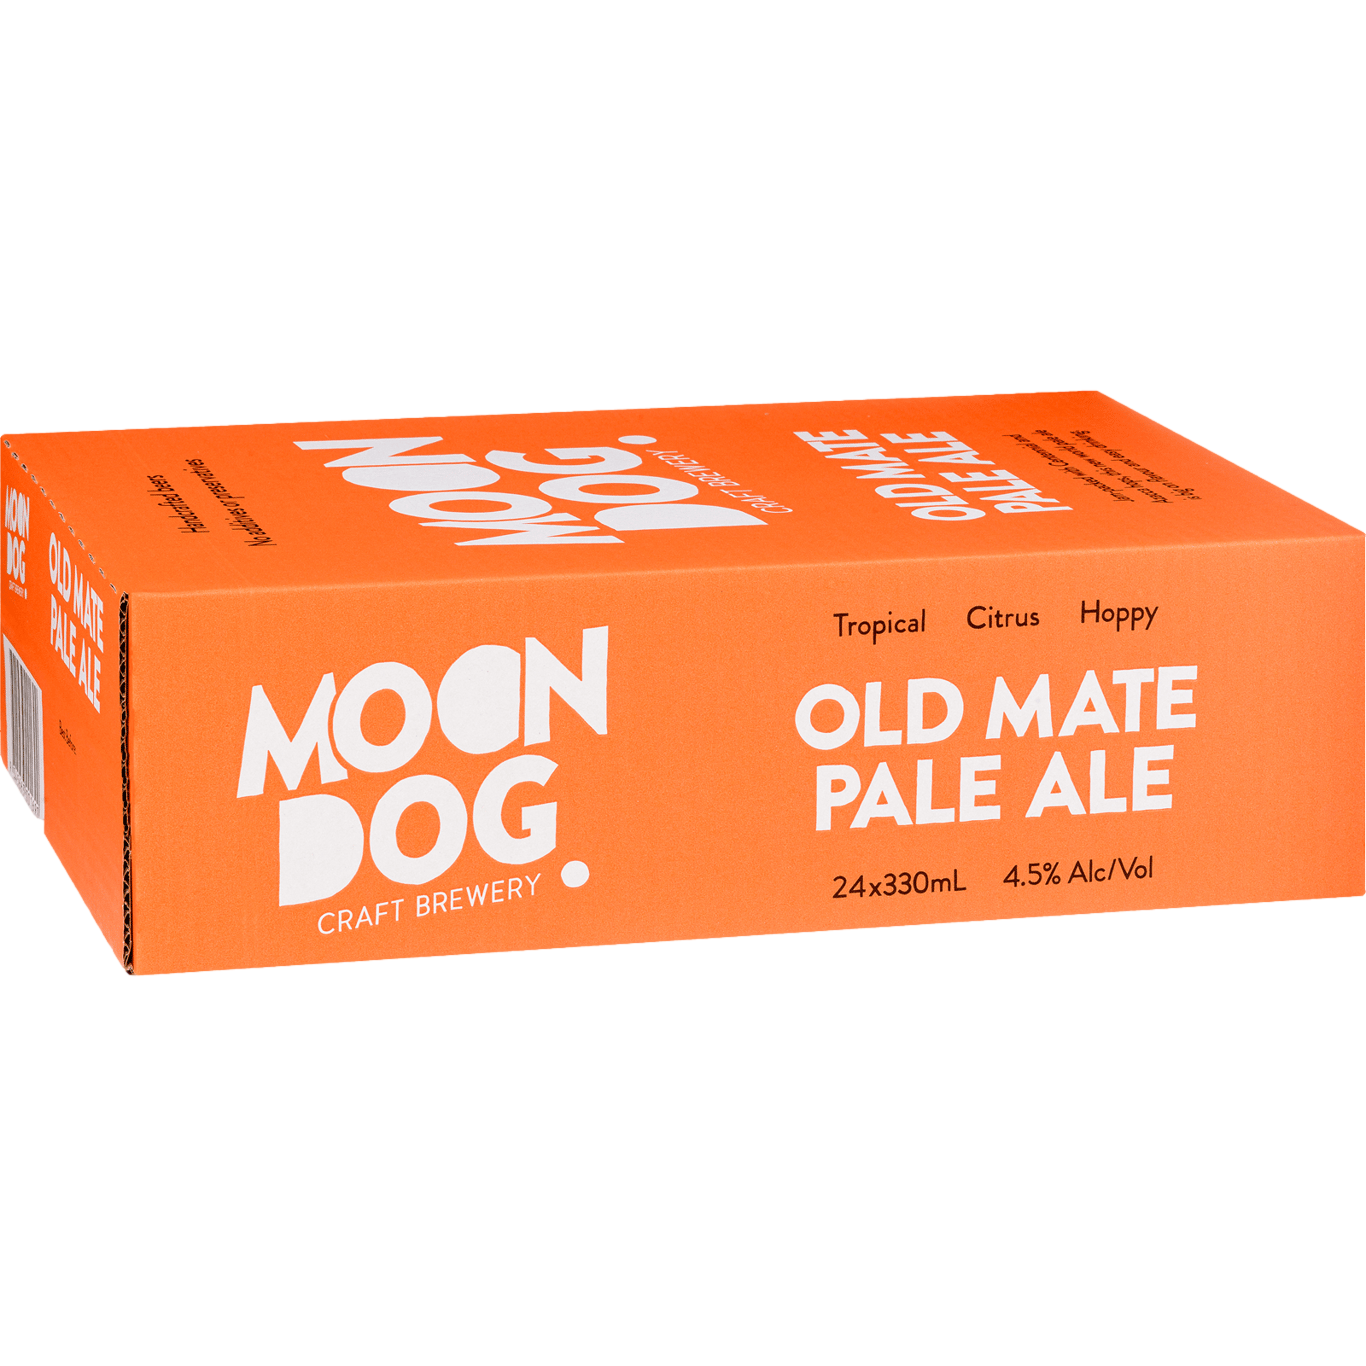 Moon Dog Old Mate Pale Ale 330ml Can Case of 24